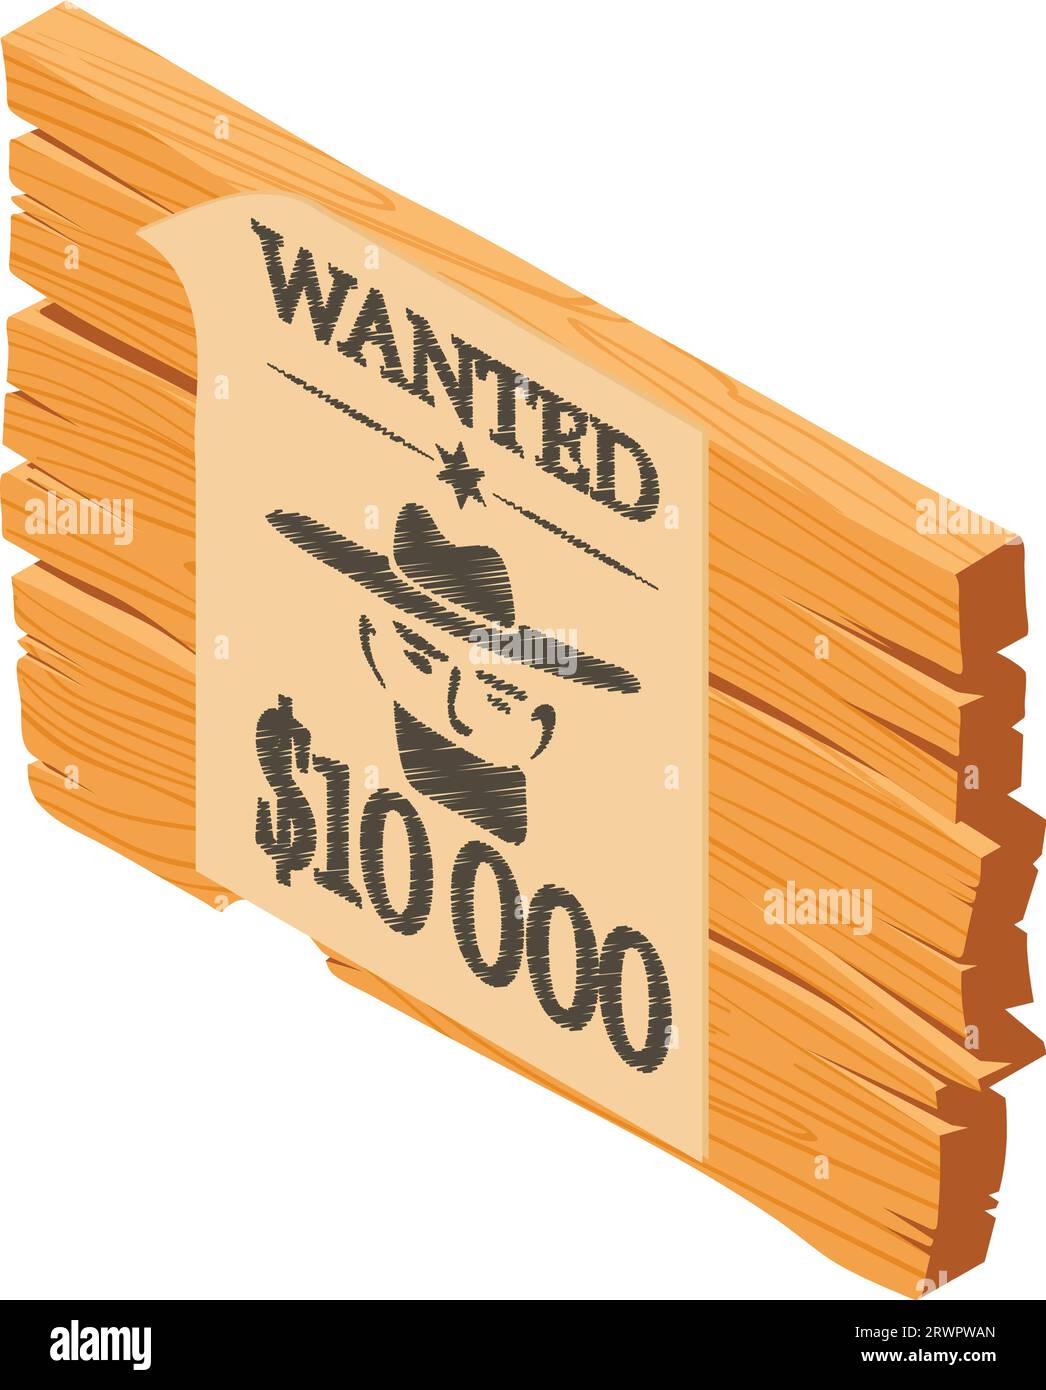 Wild west icon isometric vector. Old wanted poster on wooden board icon. Texas symbol, western Stock Vector